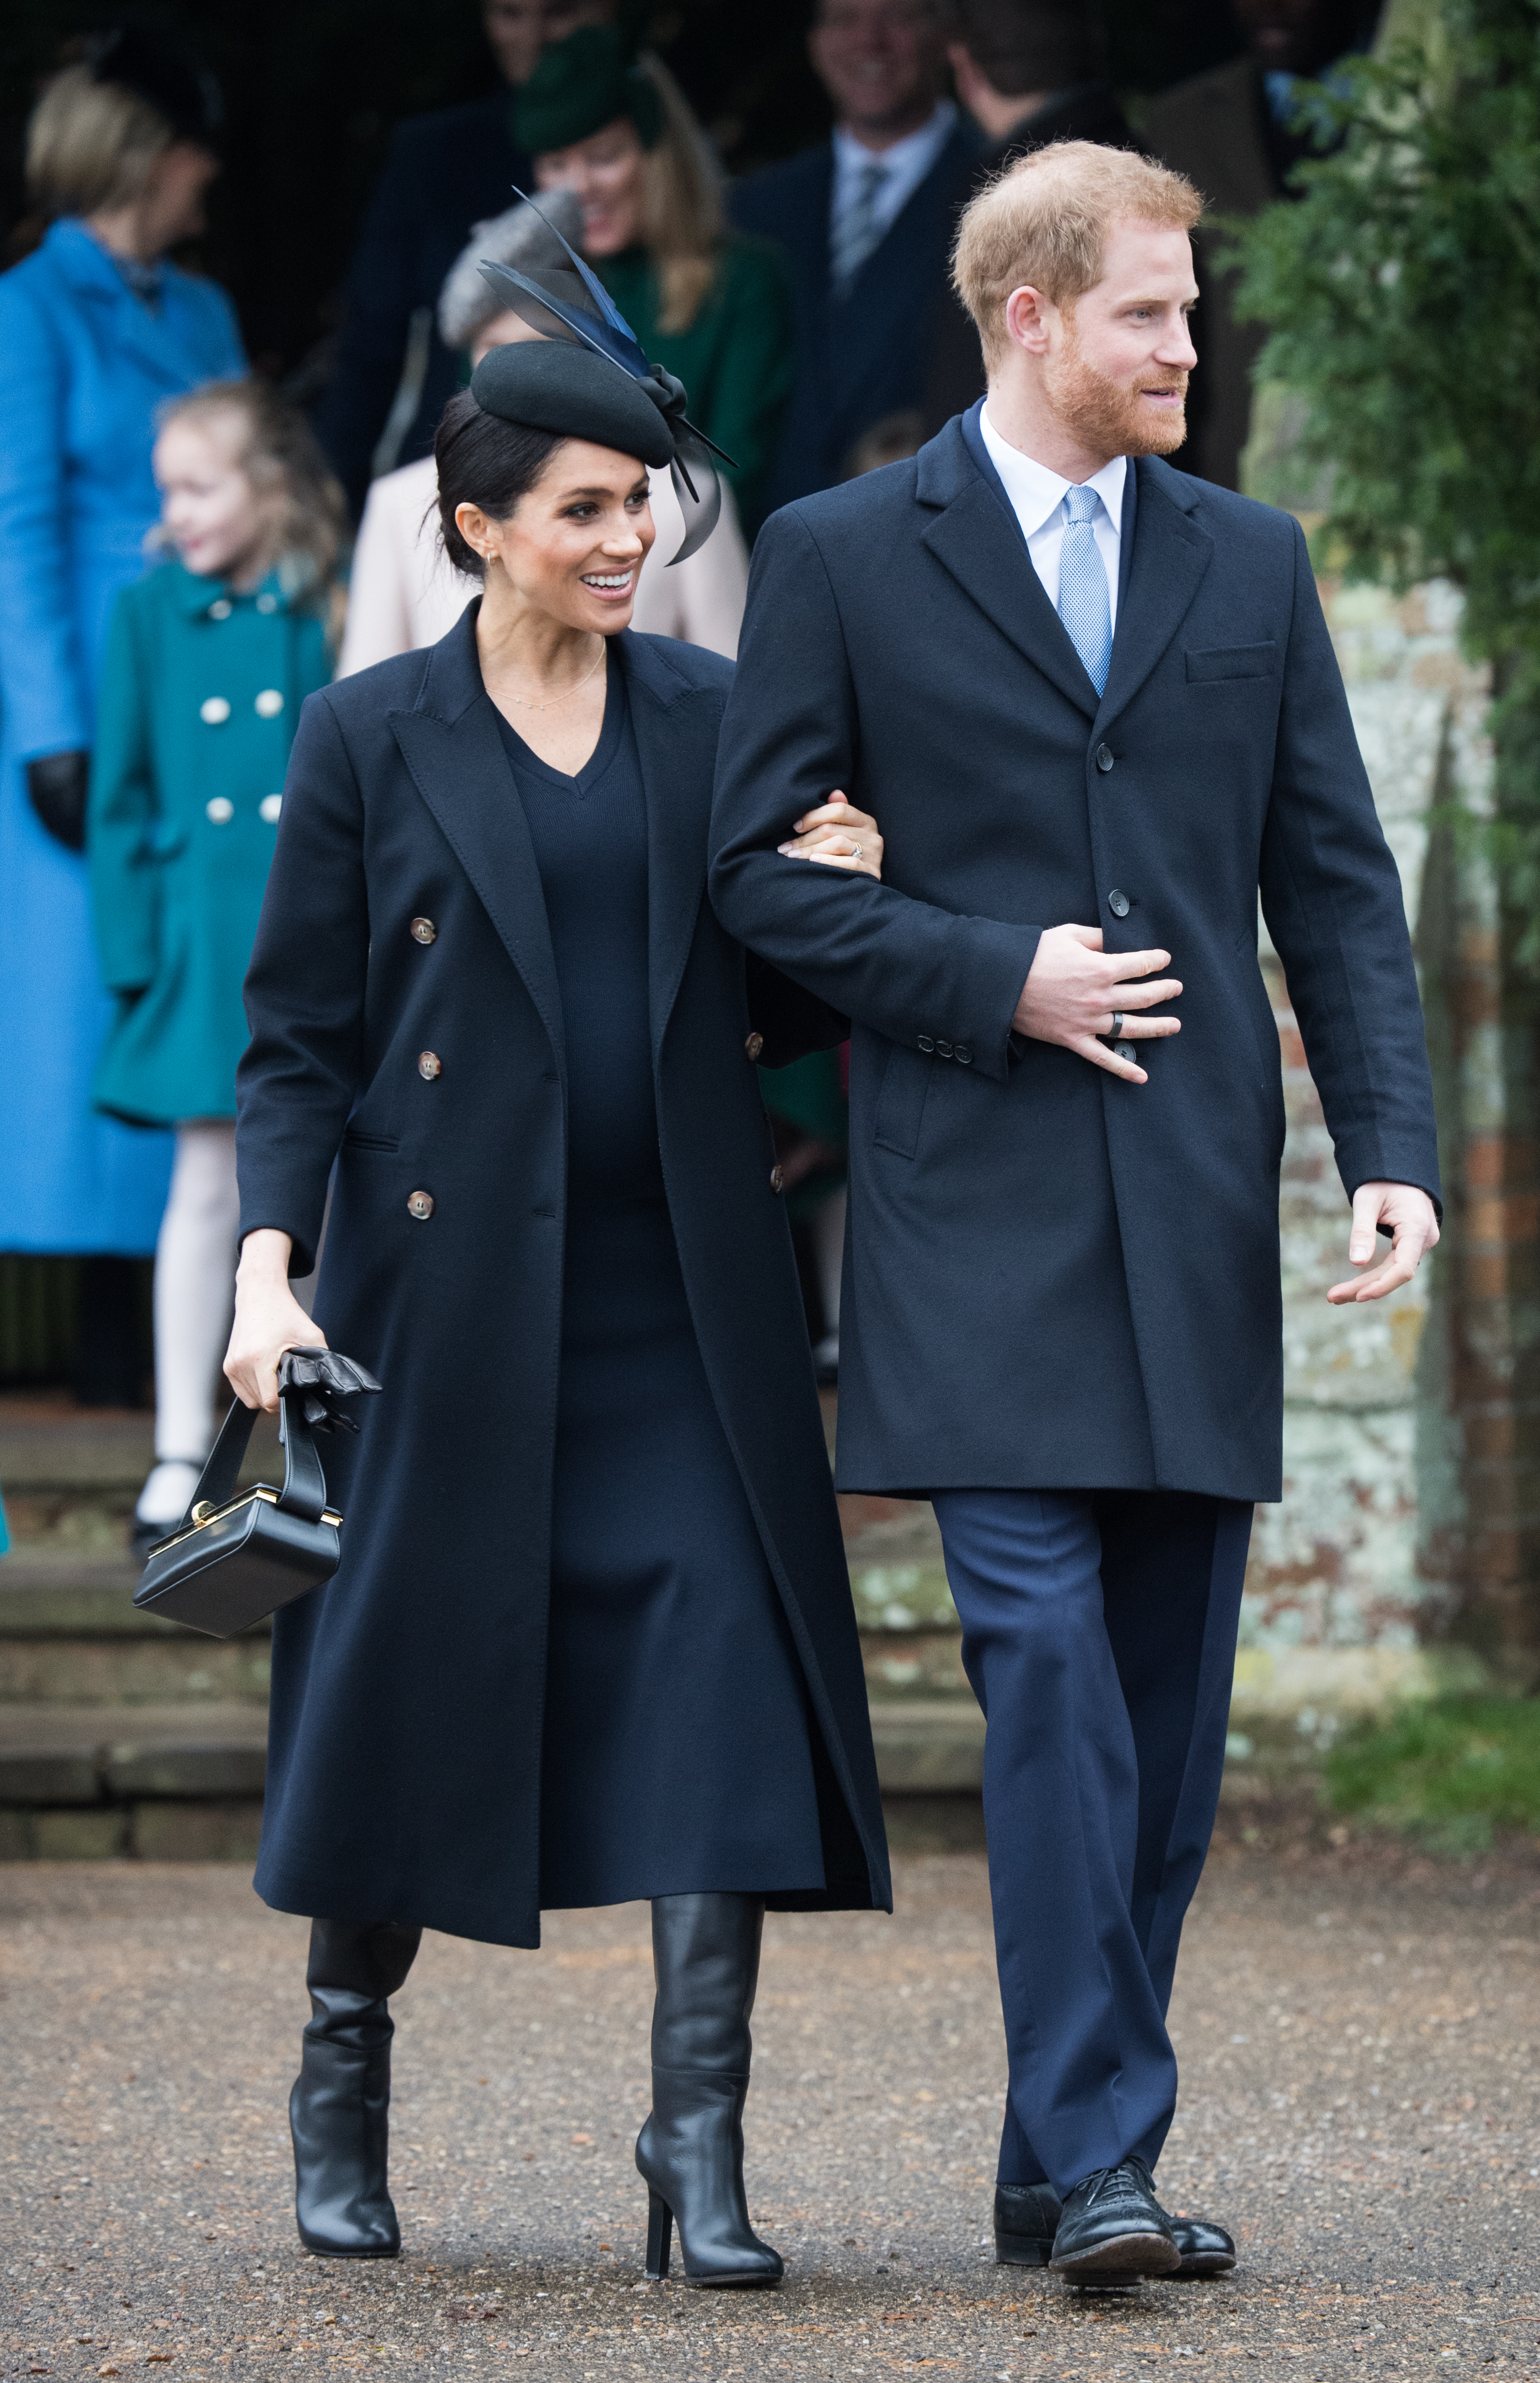 KING'S LYNN, ENGLAND - DECEMBER 25: Meghan, Duchess of Sussex and Prince Harry, Duke of Sussex attend Christmas Day Church service at Church of St Mary Magdalene on the Sandringham estate on December 25, 2018 in King's Lynn, England. (Photo by Samir Hussein/WireImage)